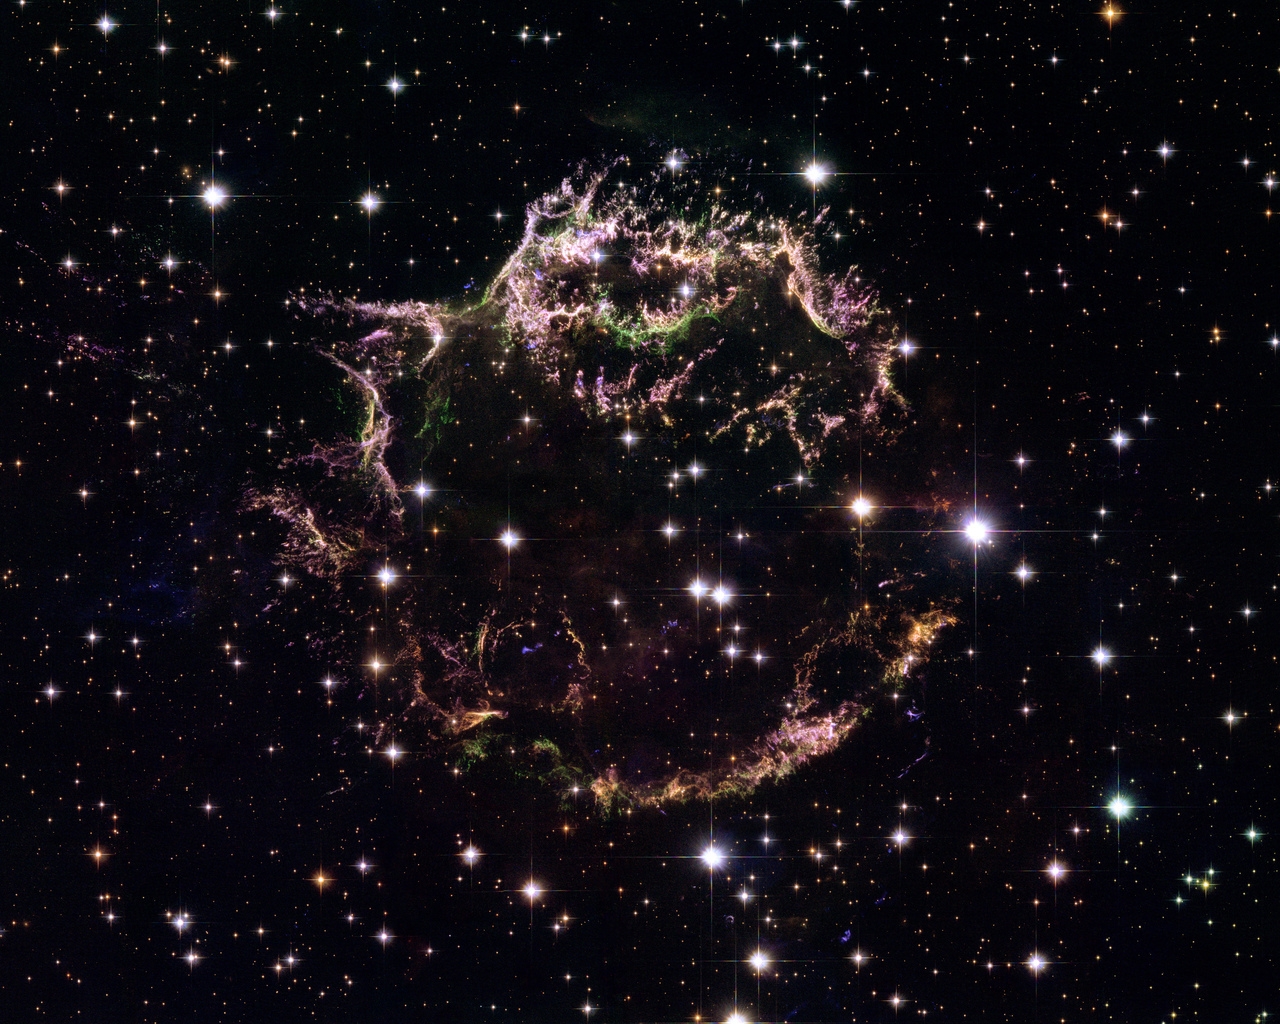 Cassiopeia for 1280 x 1024 resolution